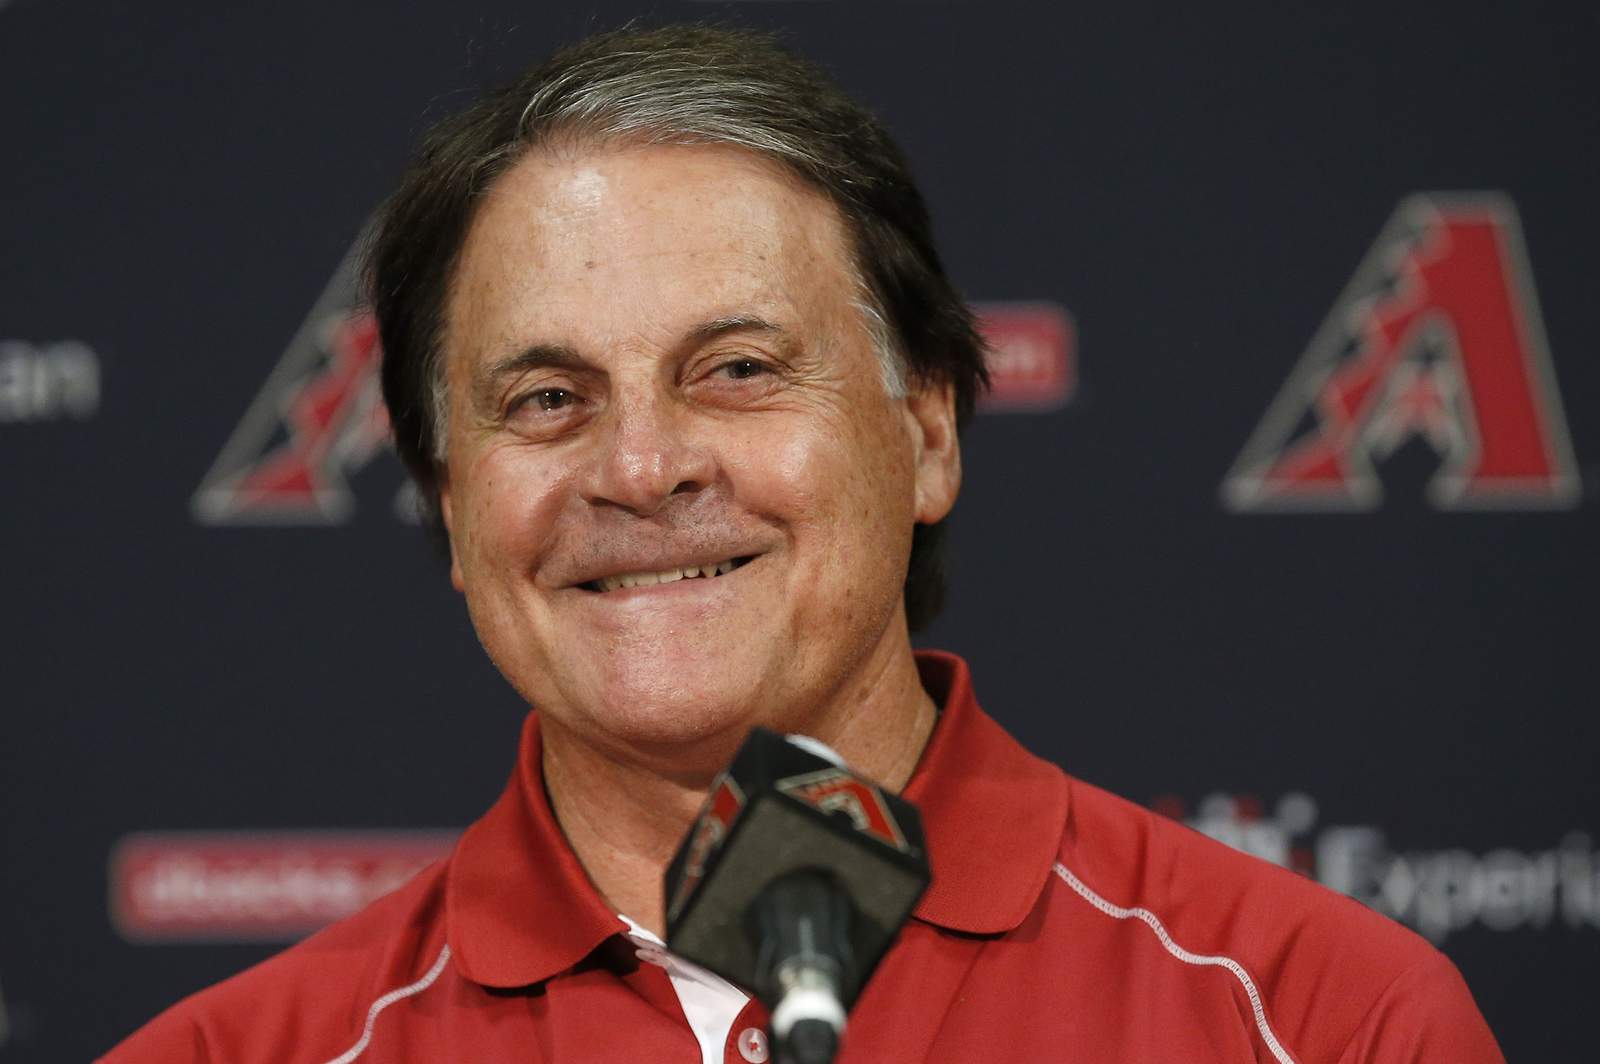 White Sox say they understand 'seriousness' La Russa case